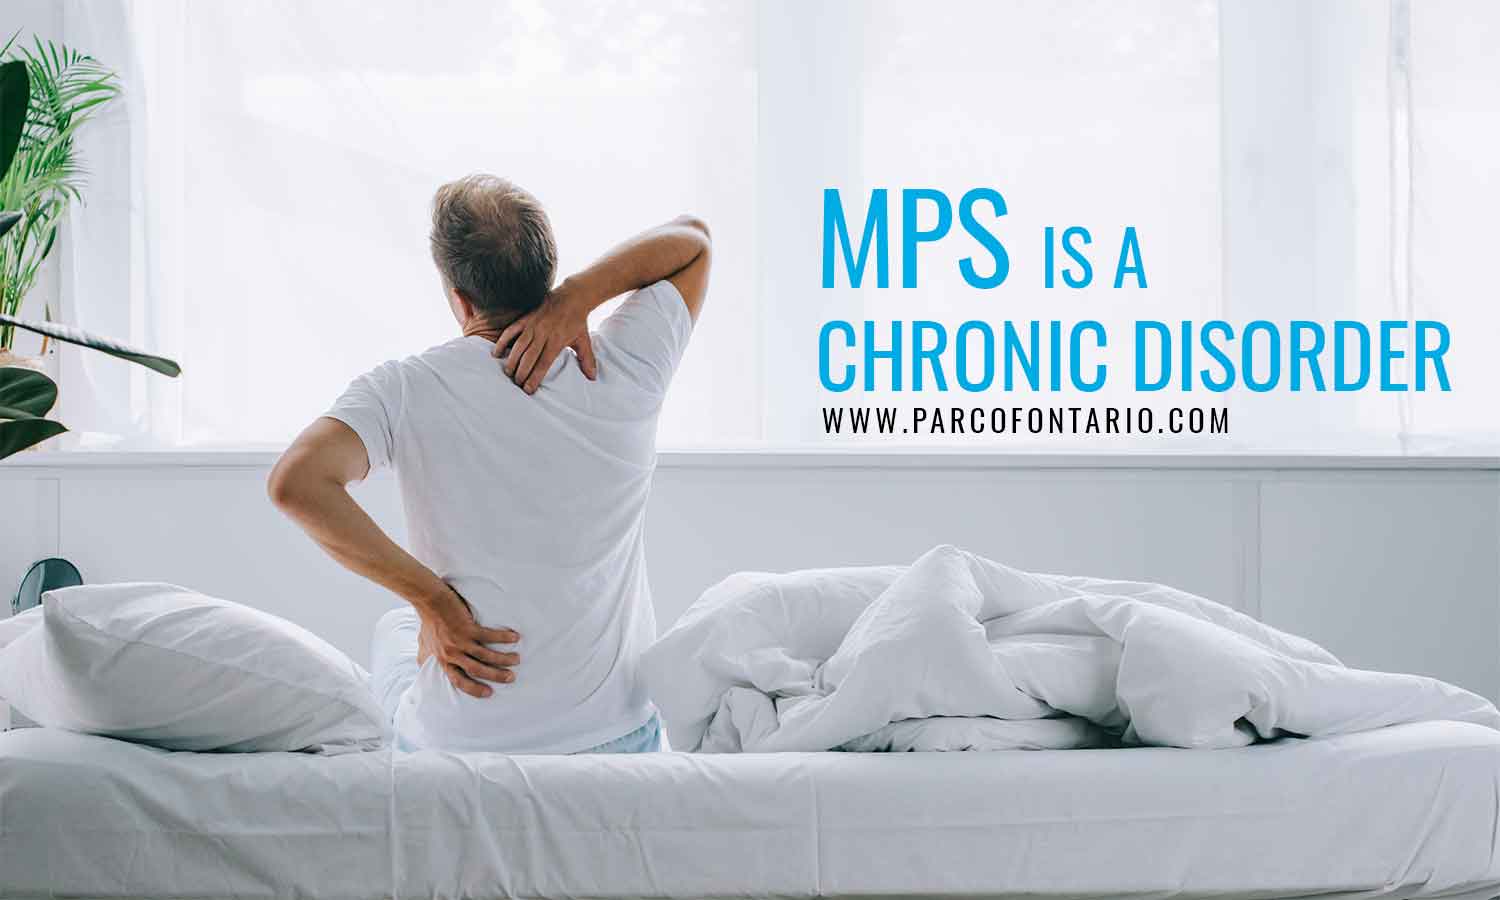 MPS is a chronic disorder